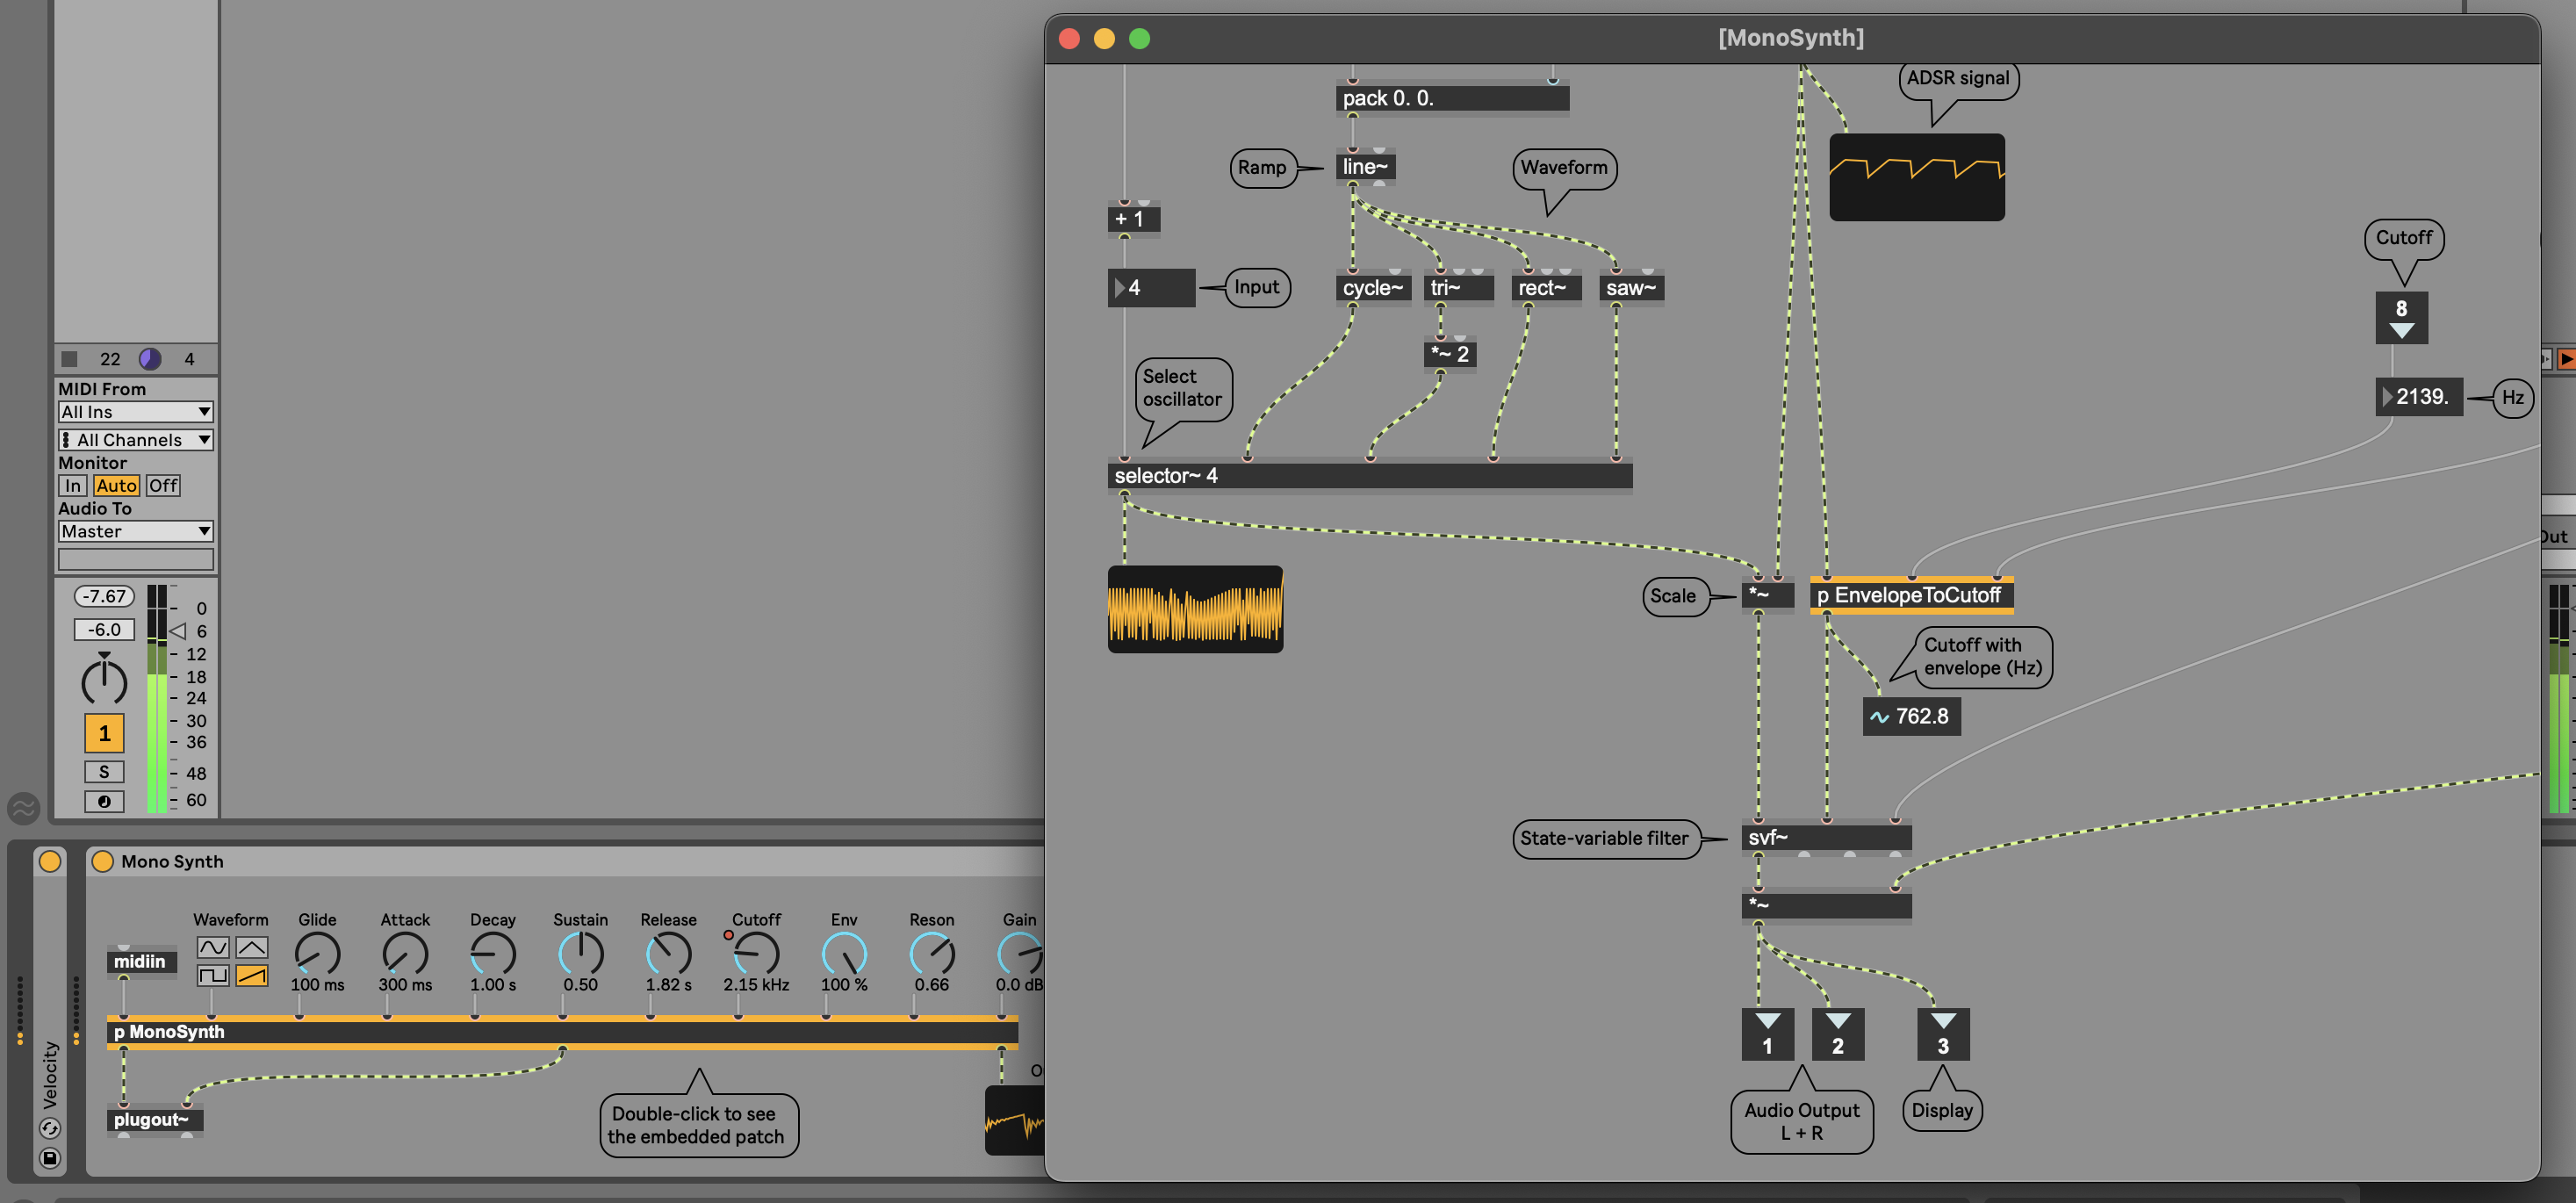 A monosynth created in Max for Live